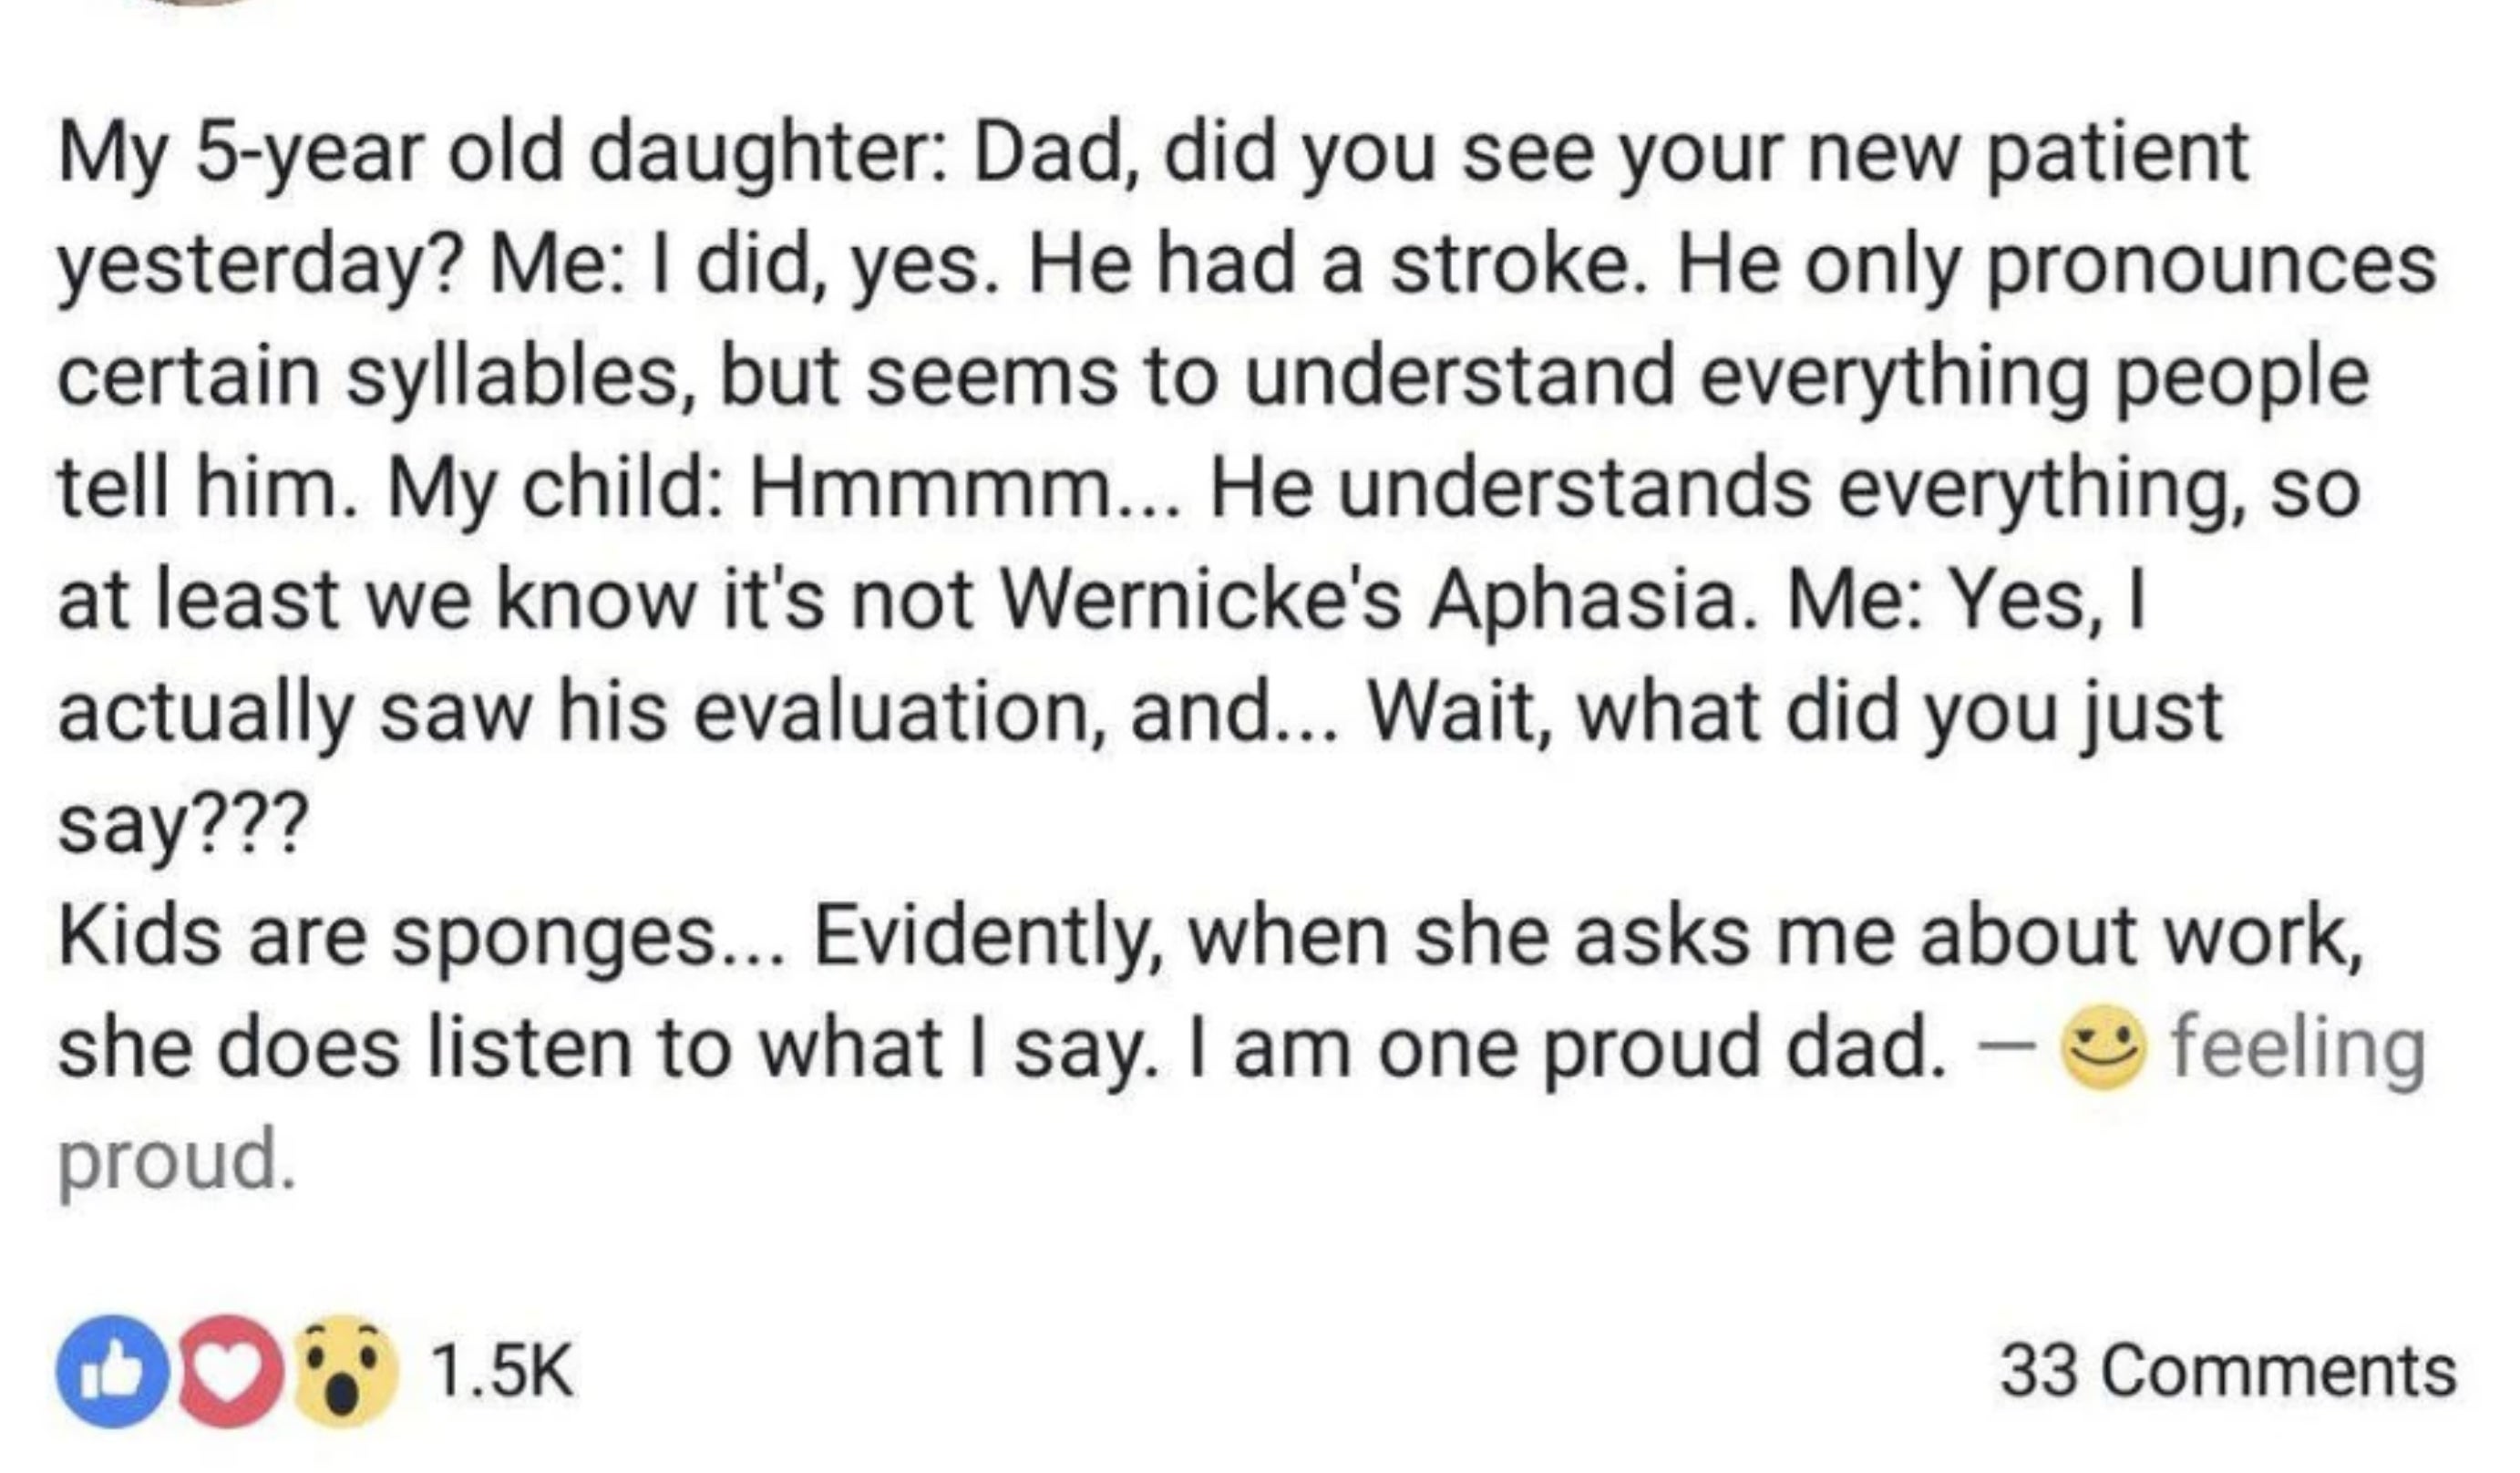 5-year-old asks Dad if he saw his new patient yesterday, Dad says yes, he had a stroke and only pronounces some syllables, and daughter says &quot;So at least we know it&#x27;s not Wernicke&#x27;s aphasia,&quot; and Dad says &quot;Kids are sponges&quot;